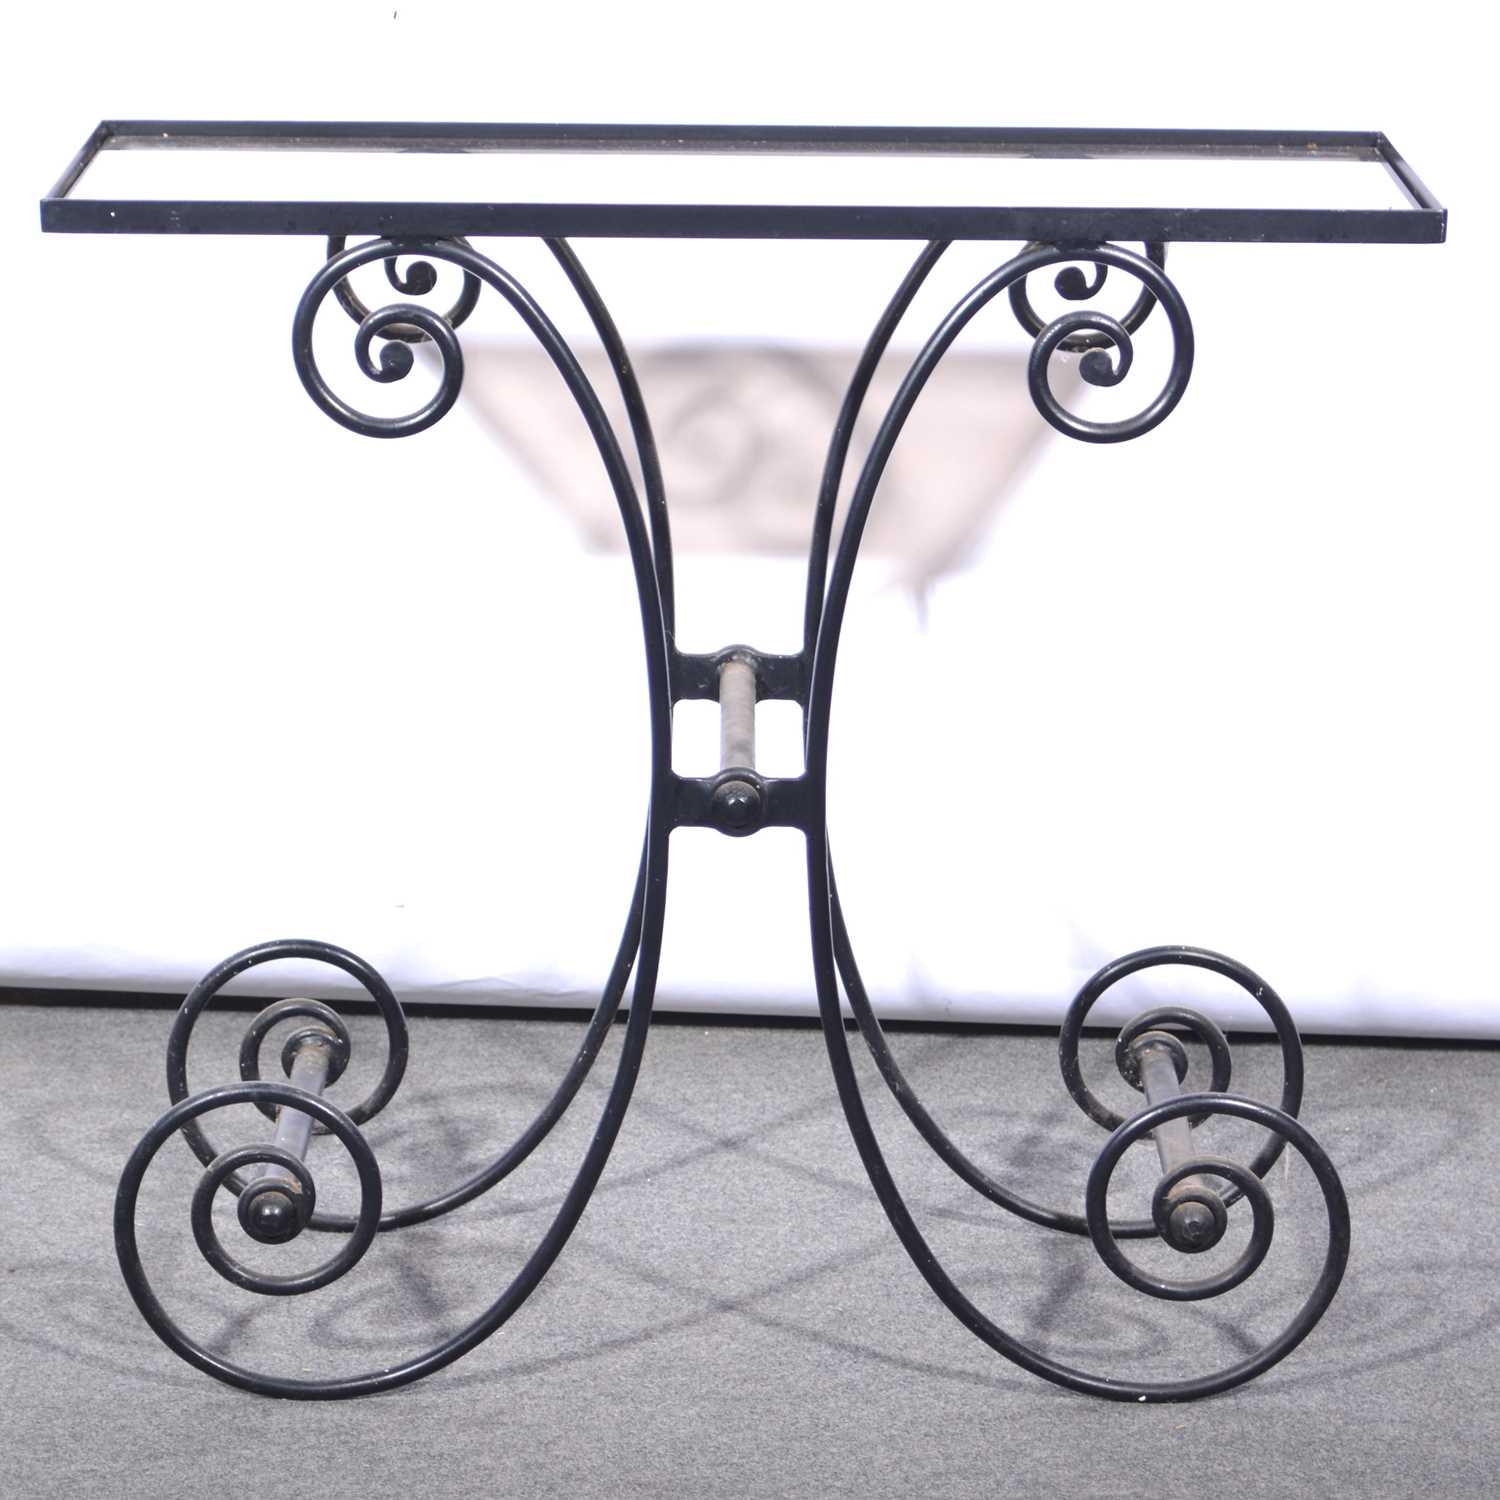 Lot 552 - Vintage wrought iron console table